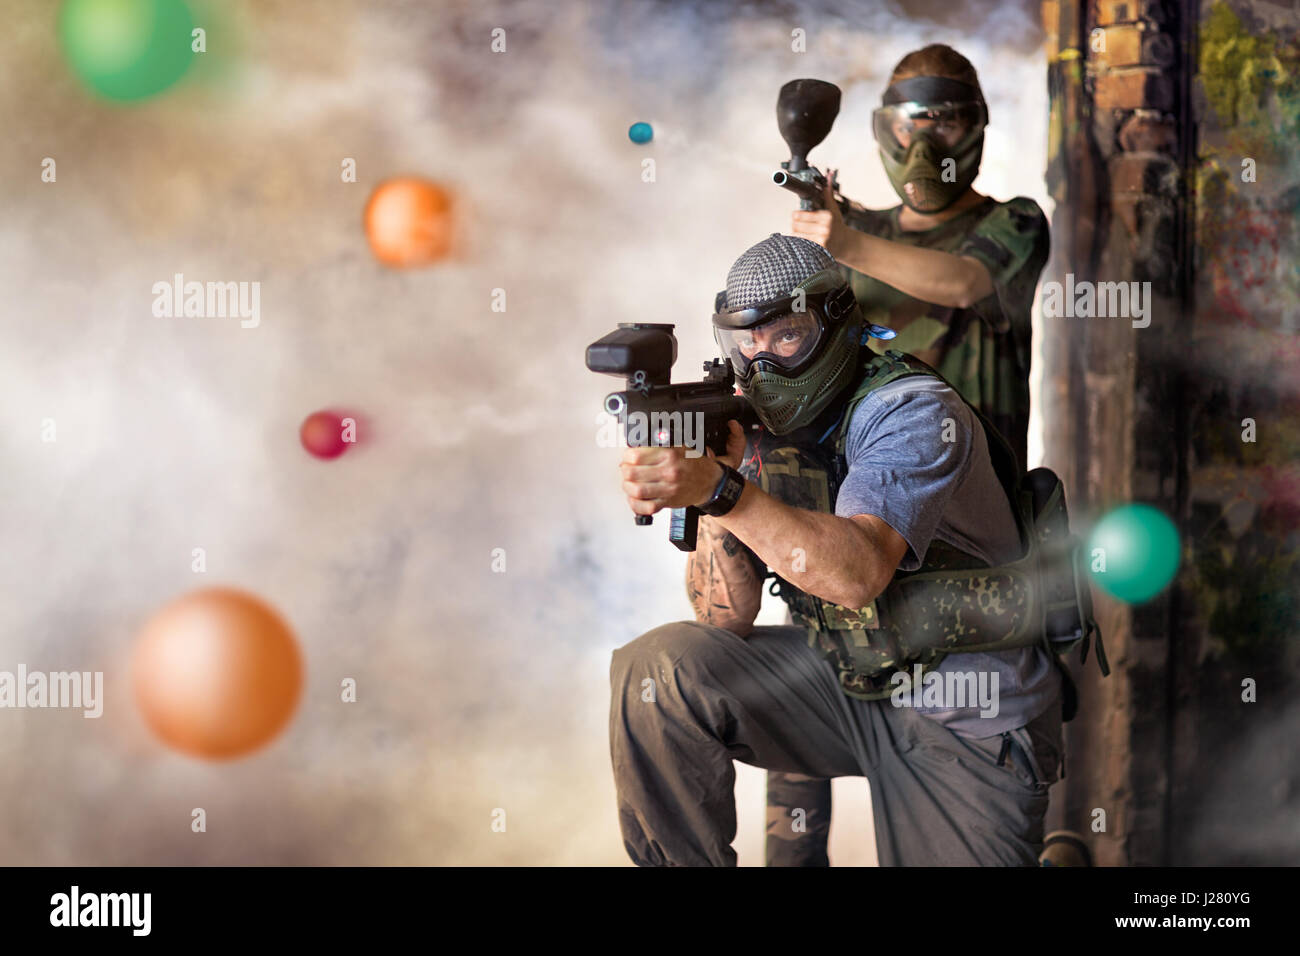 Play paintball game, two player with guns Stock Photo